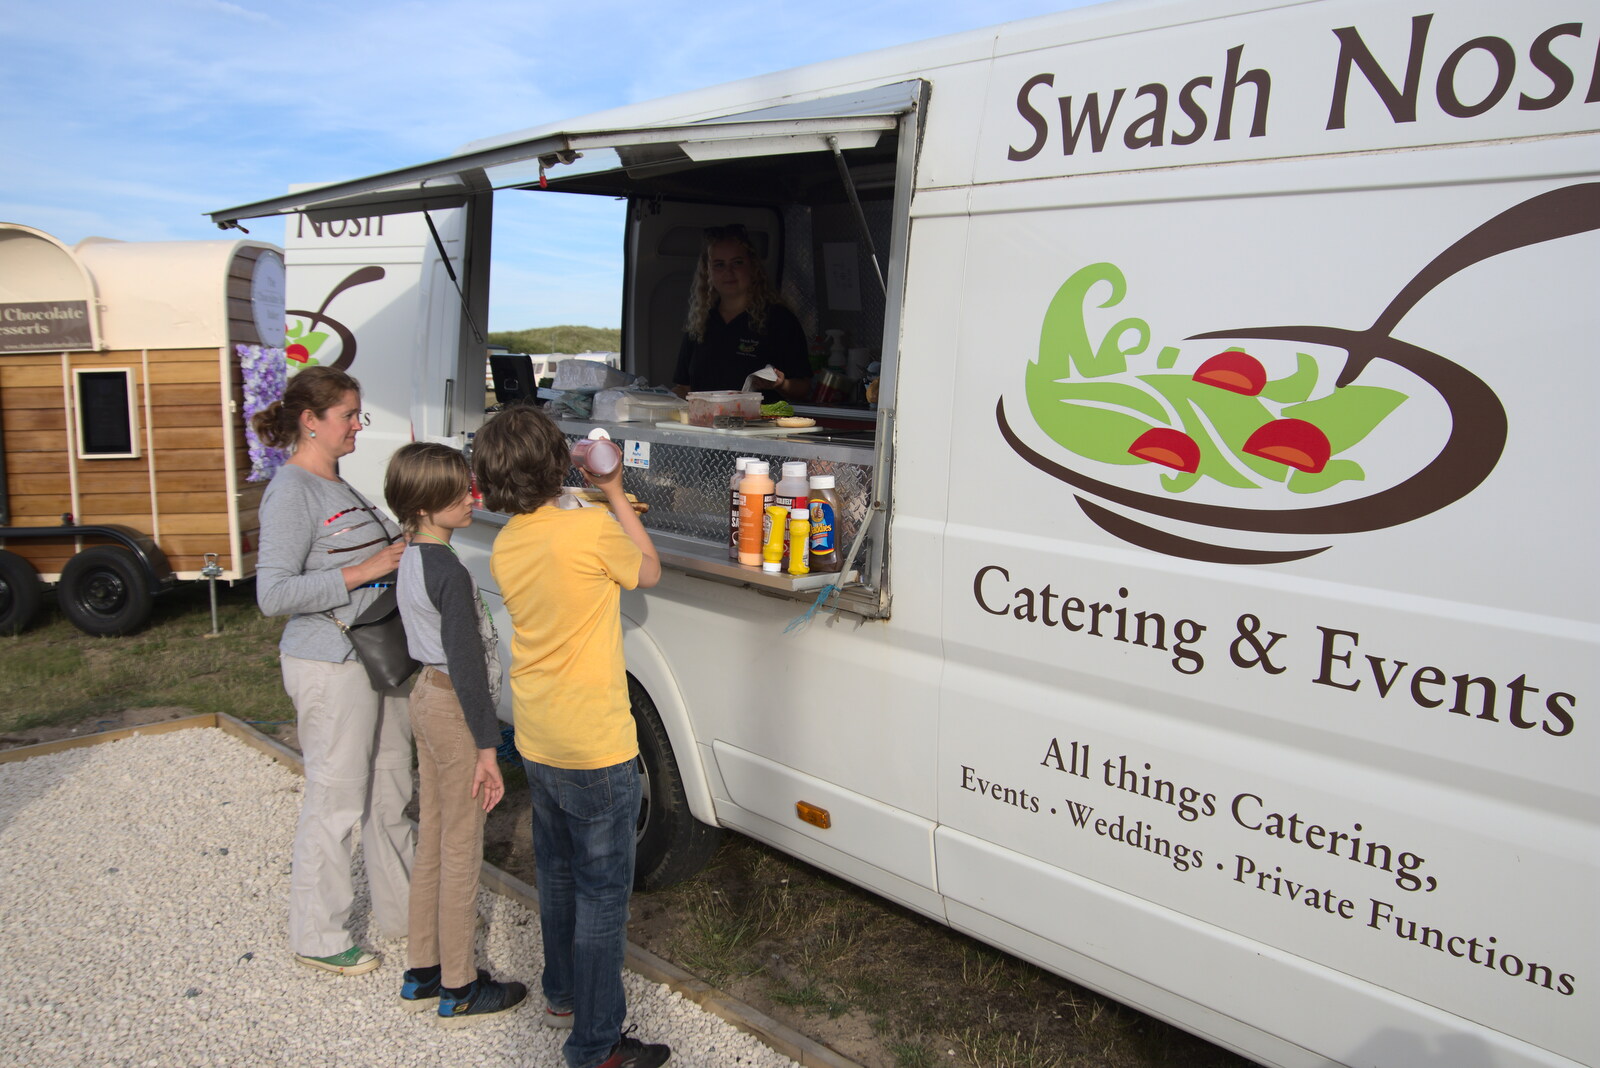 The boys get hotdogs from the Swash Nosh van from Camping in the Dunes, Waxham Sands, Norfolk - 9th July 2022